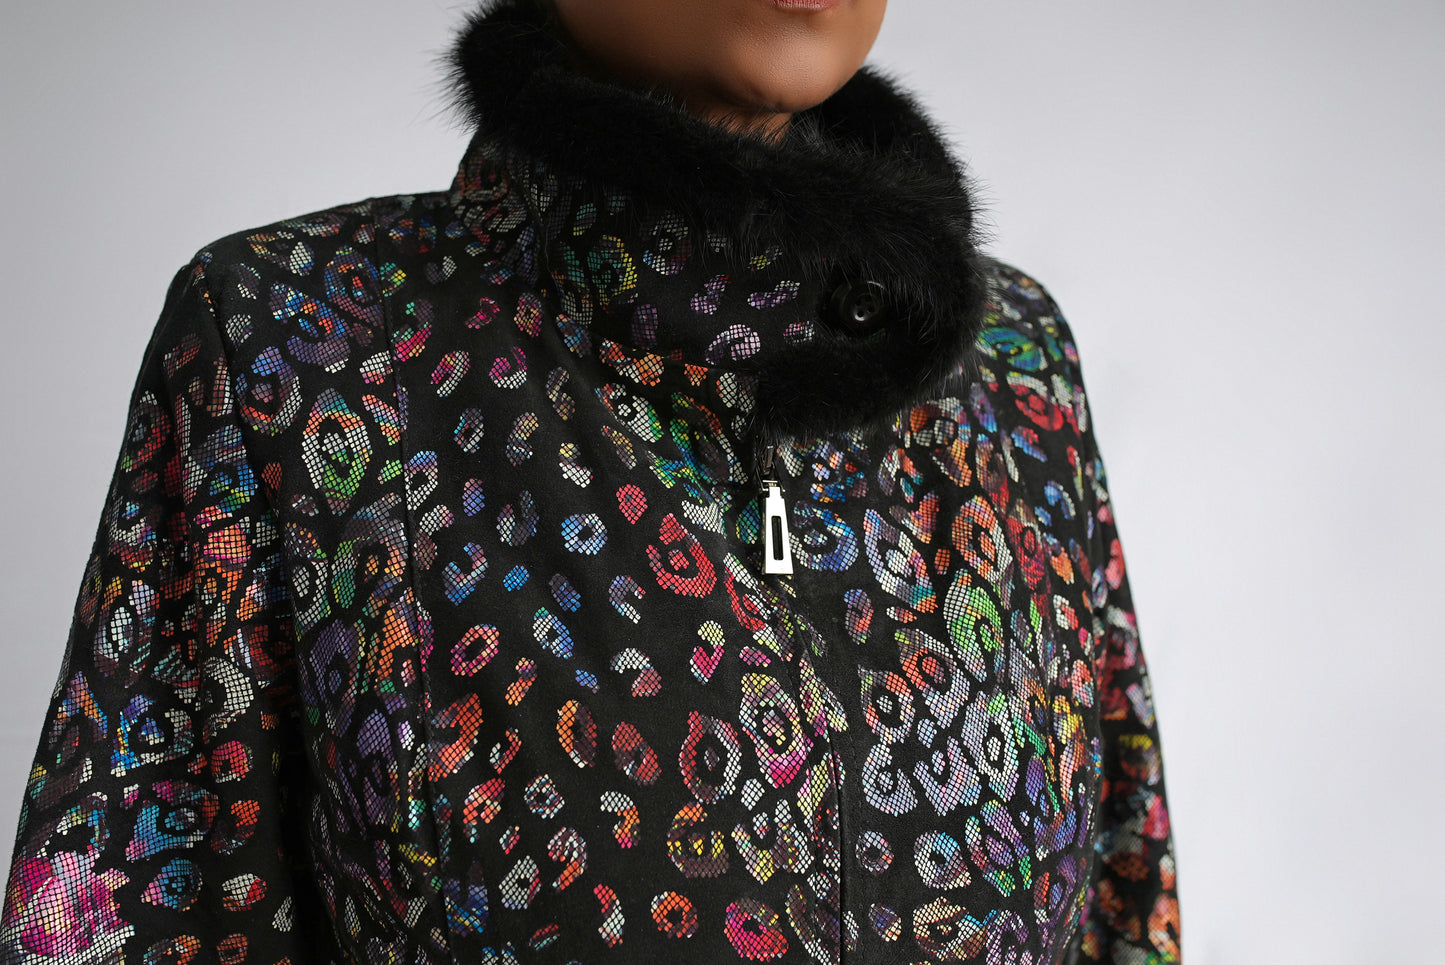 Kaleidoscope Lamb Leather Jacket with Mink Fur Accents